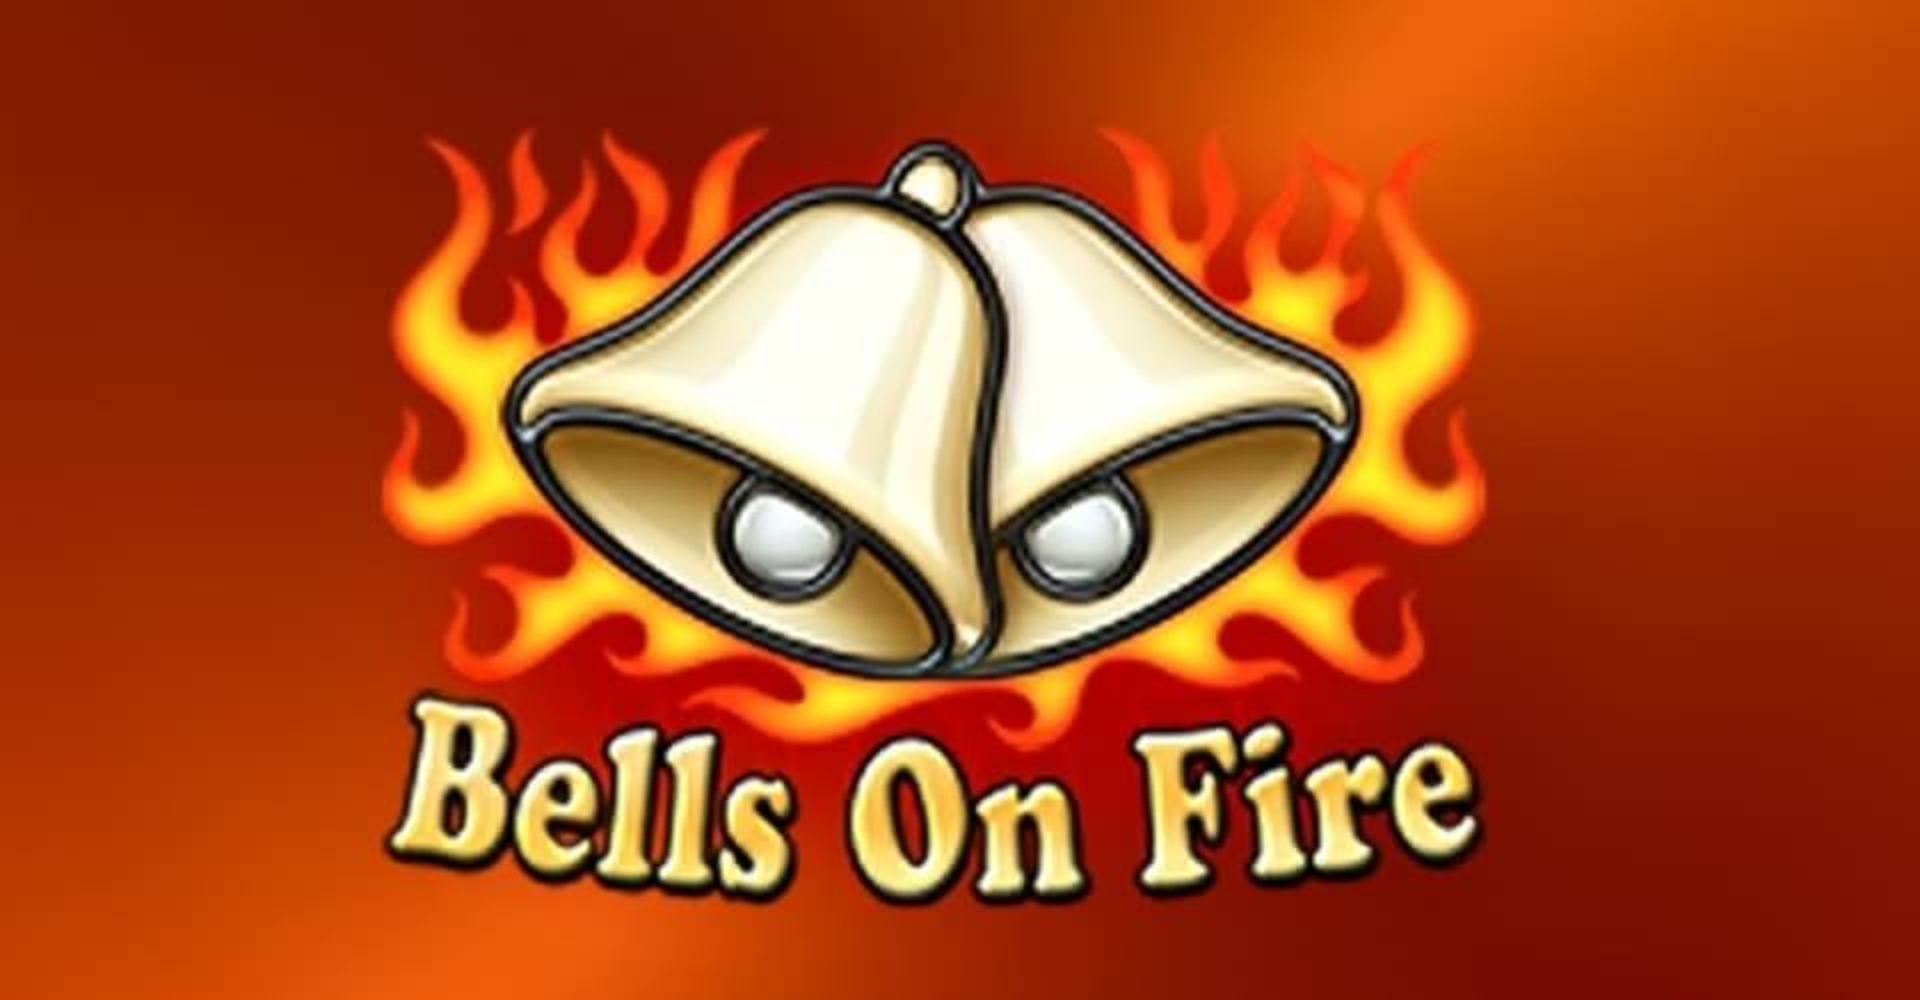 The Bells On Fire Rombo Online Slot Demo Game by Amatic Industries